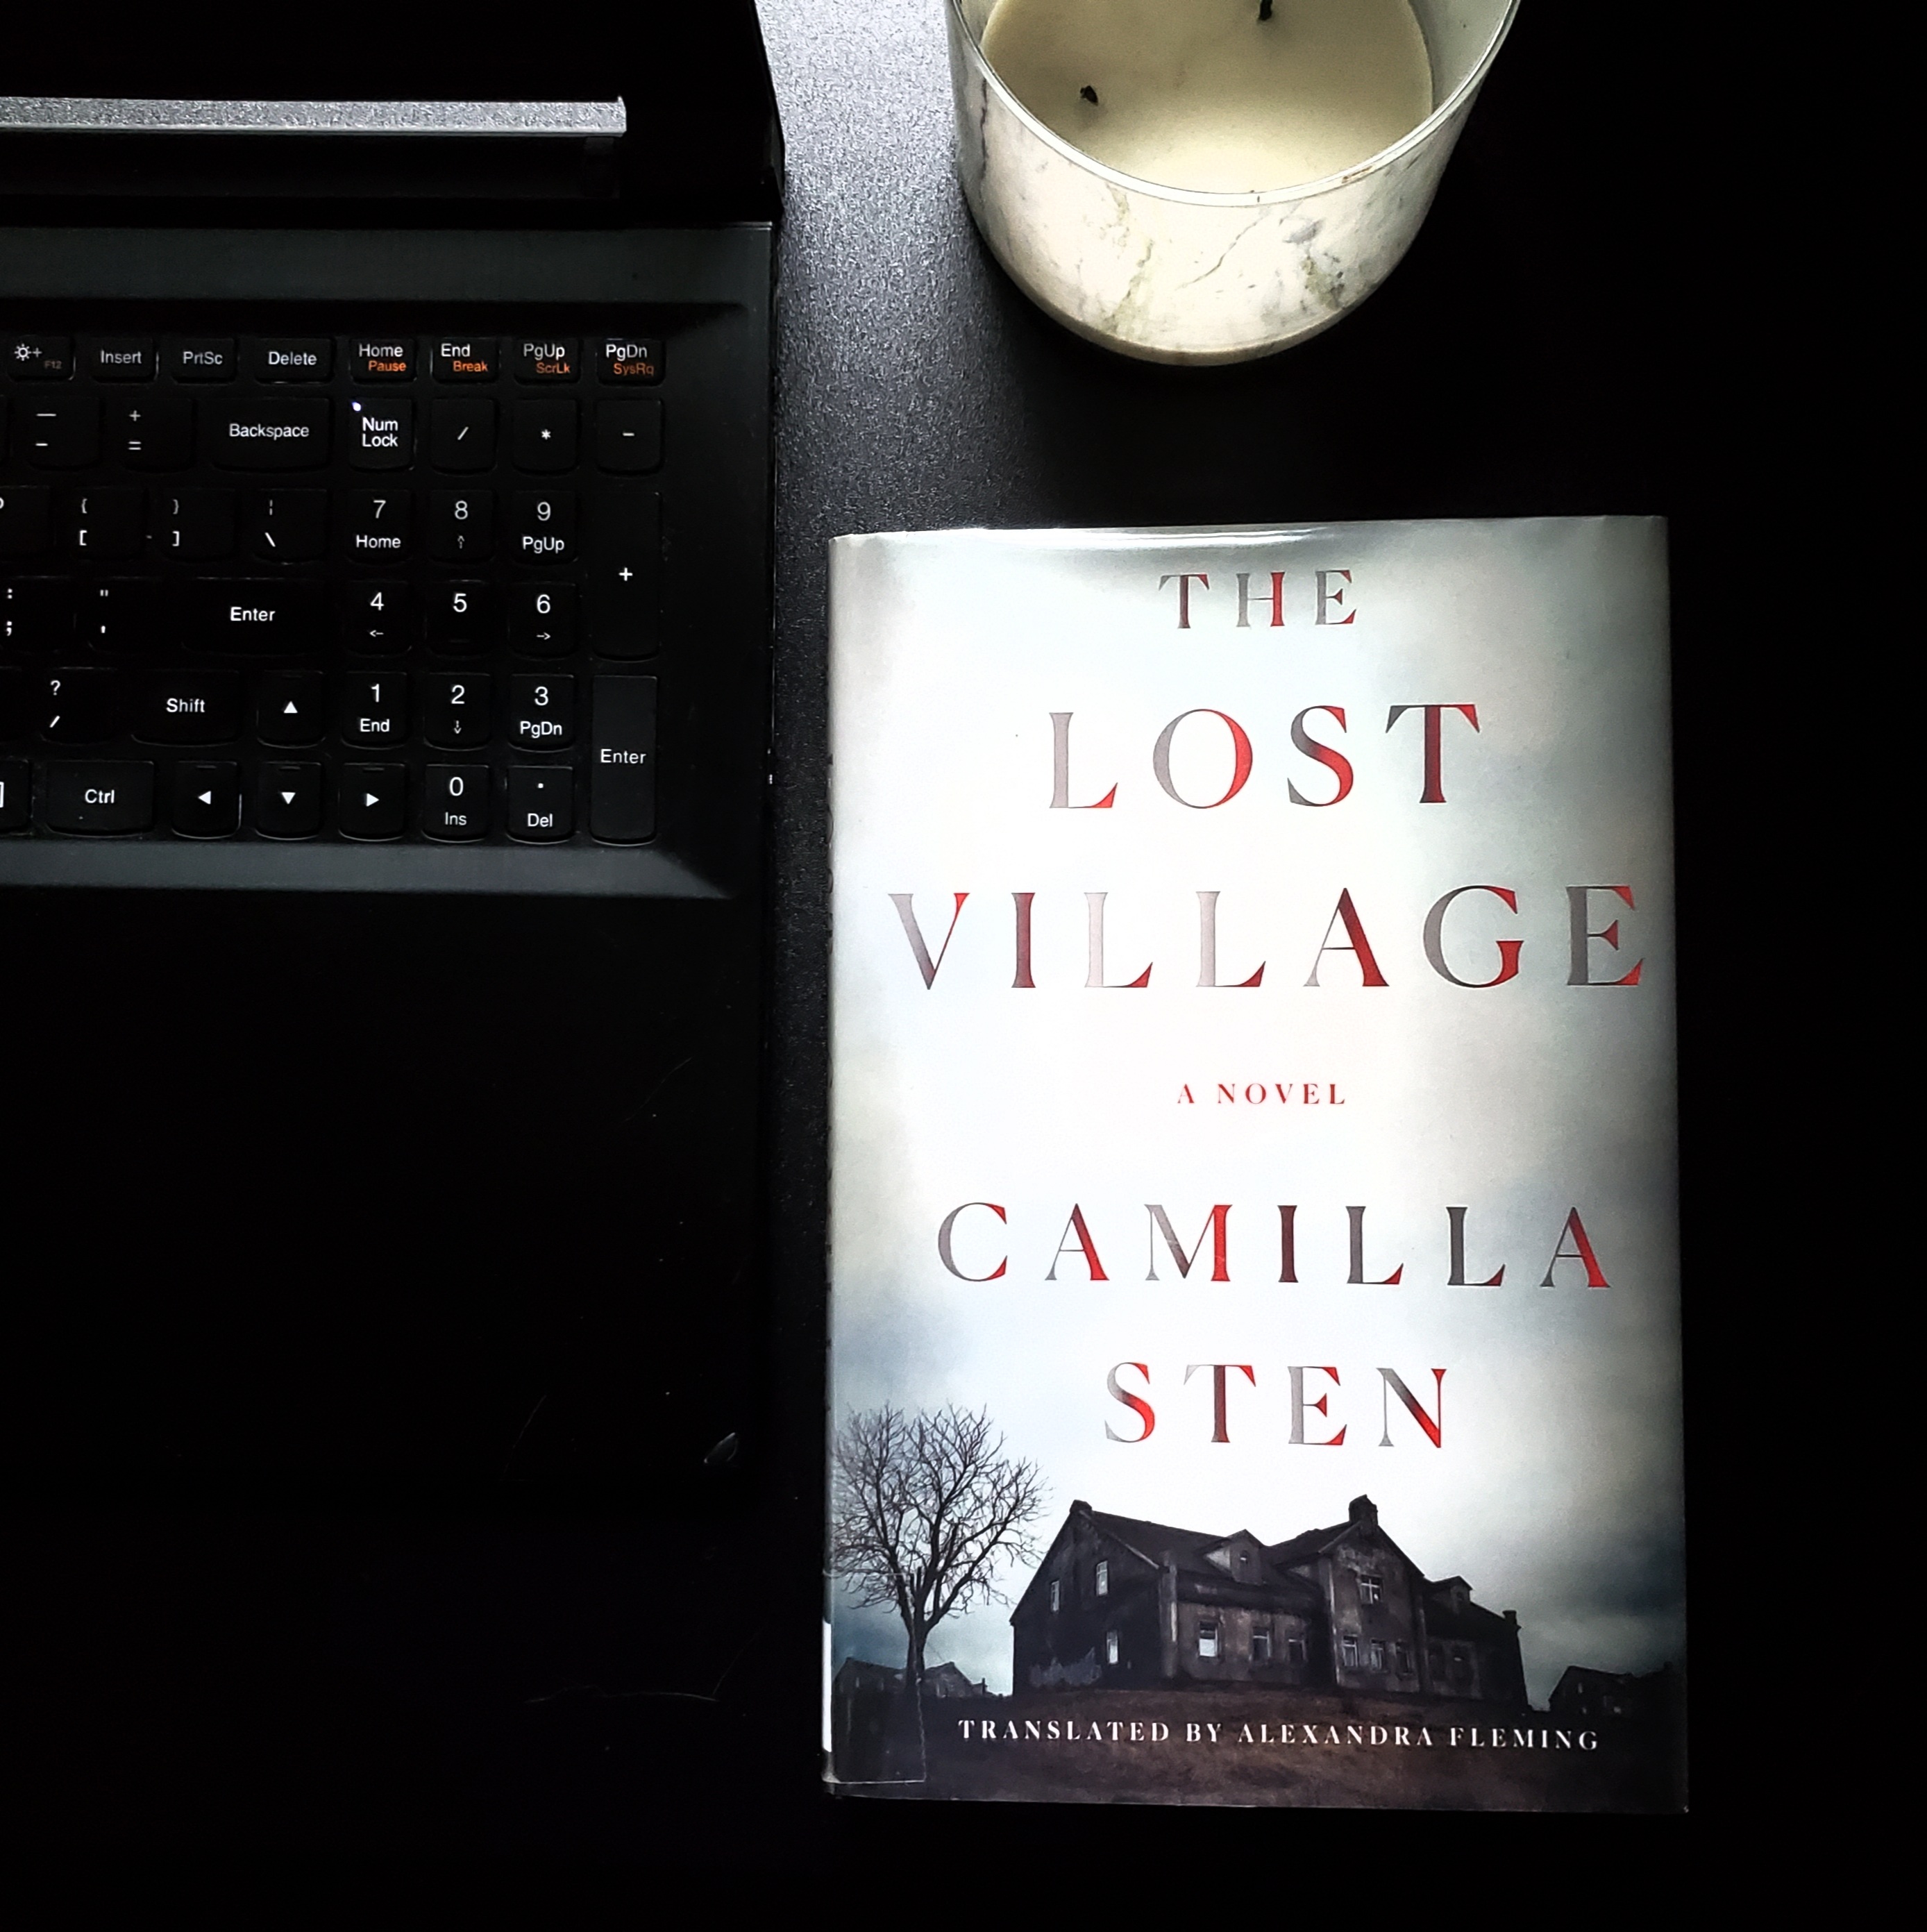 Book Review of THE LOST VILLAGE